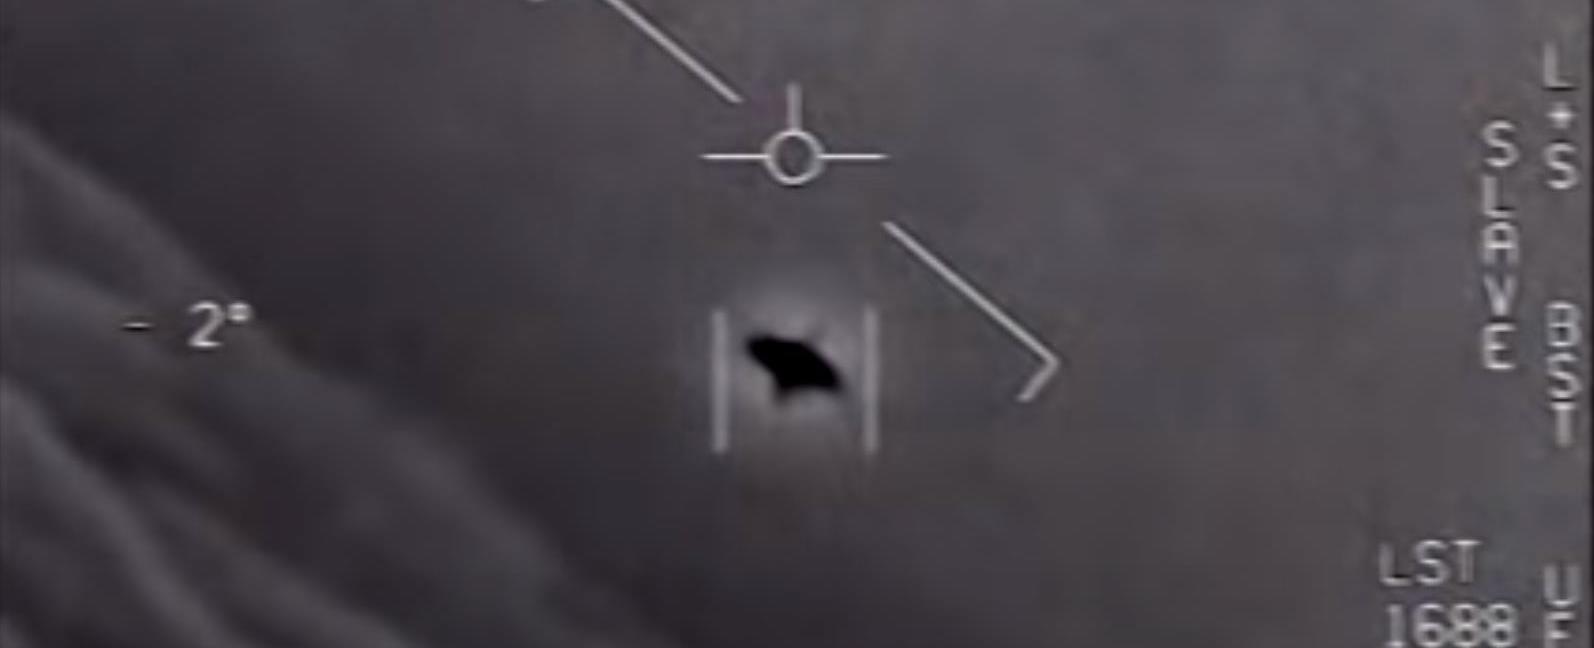 The united states department of defense officially released three short videos showing unidentified aerial phenomena taken by navy pilots in 2004 and 2005